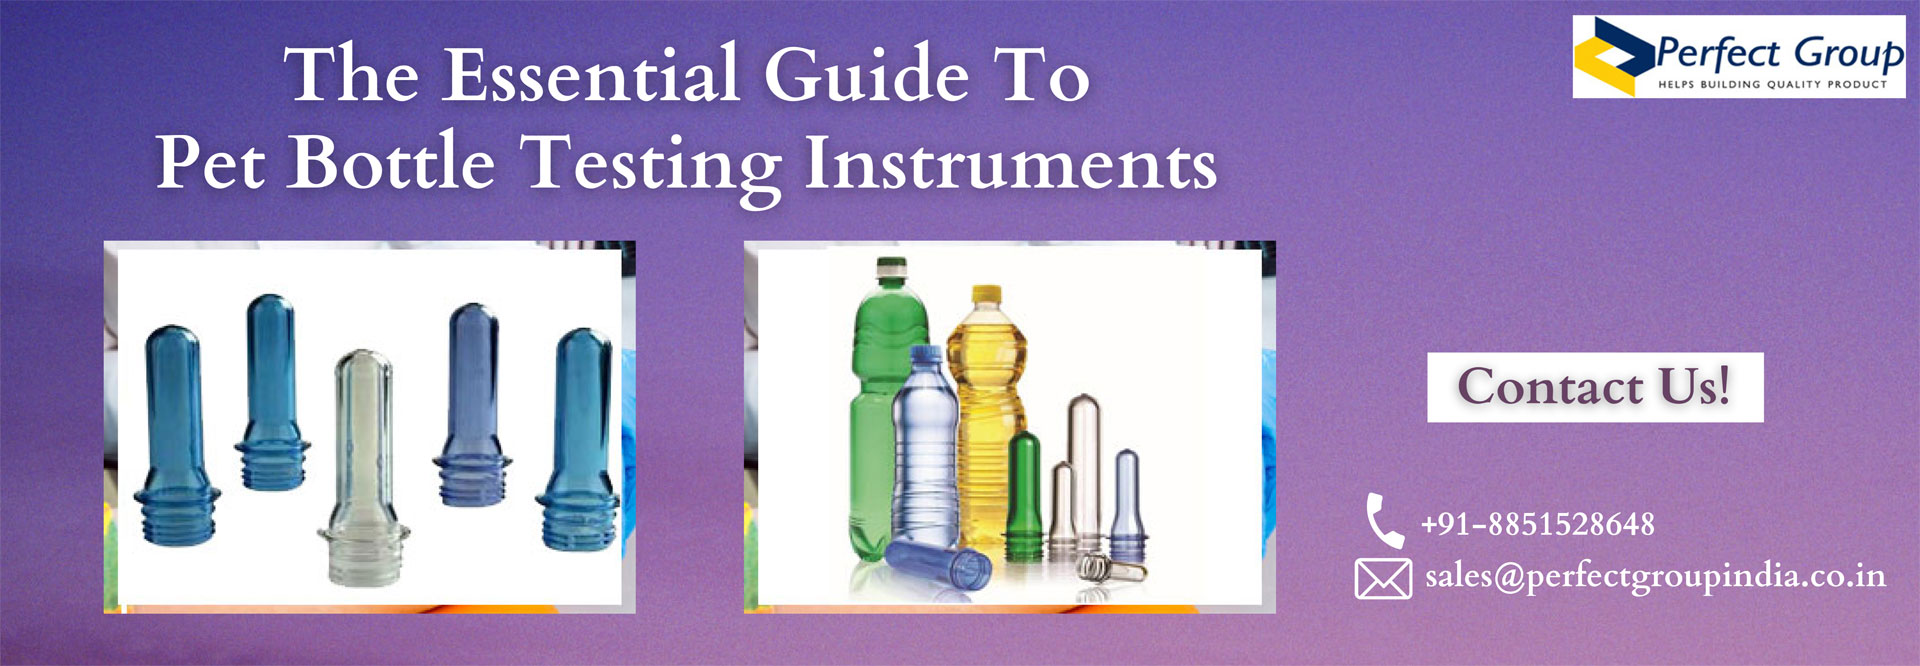 The Essential Guide To Pet Bottle Testing Instruments